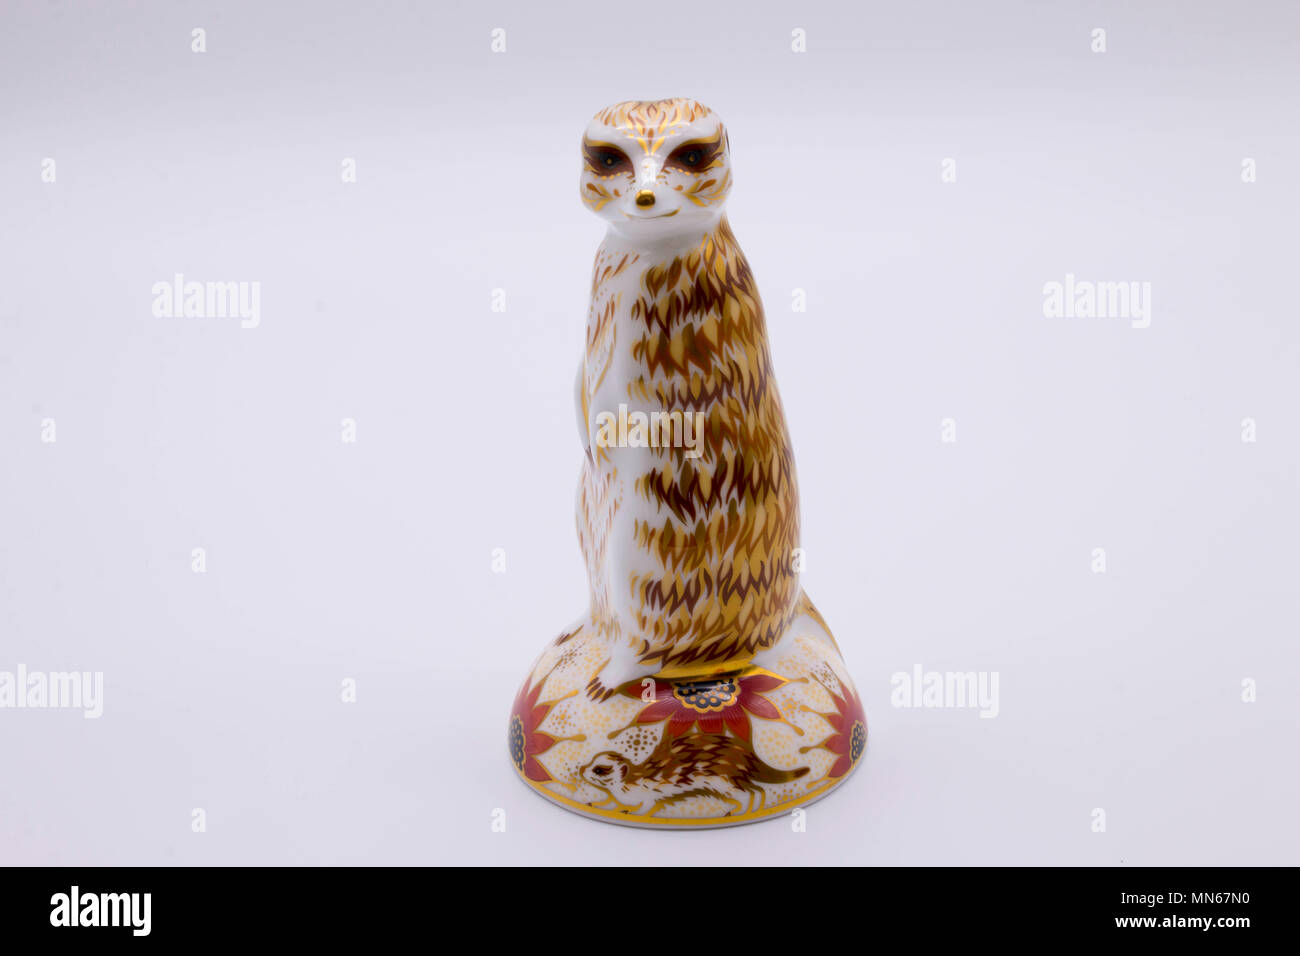 Royal Crown Derby bone china paperweight of a meerkat uk Stock Photo